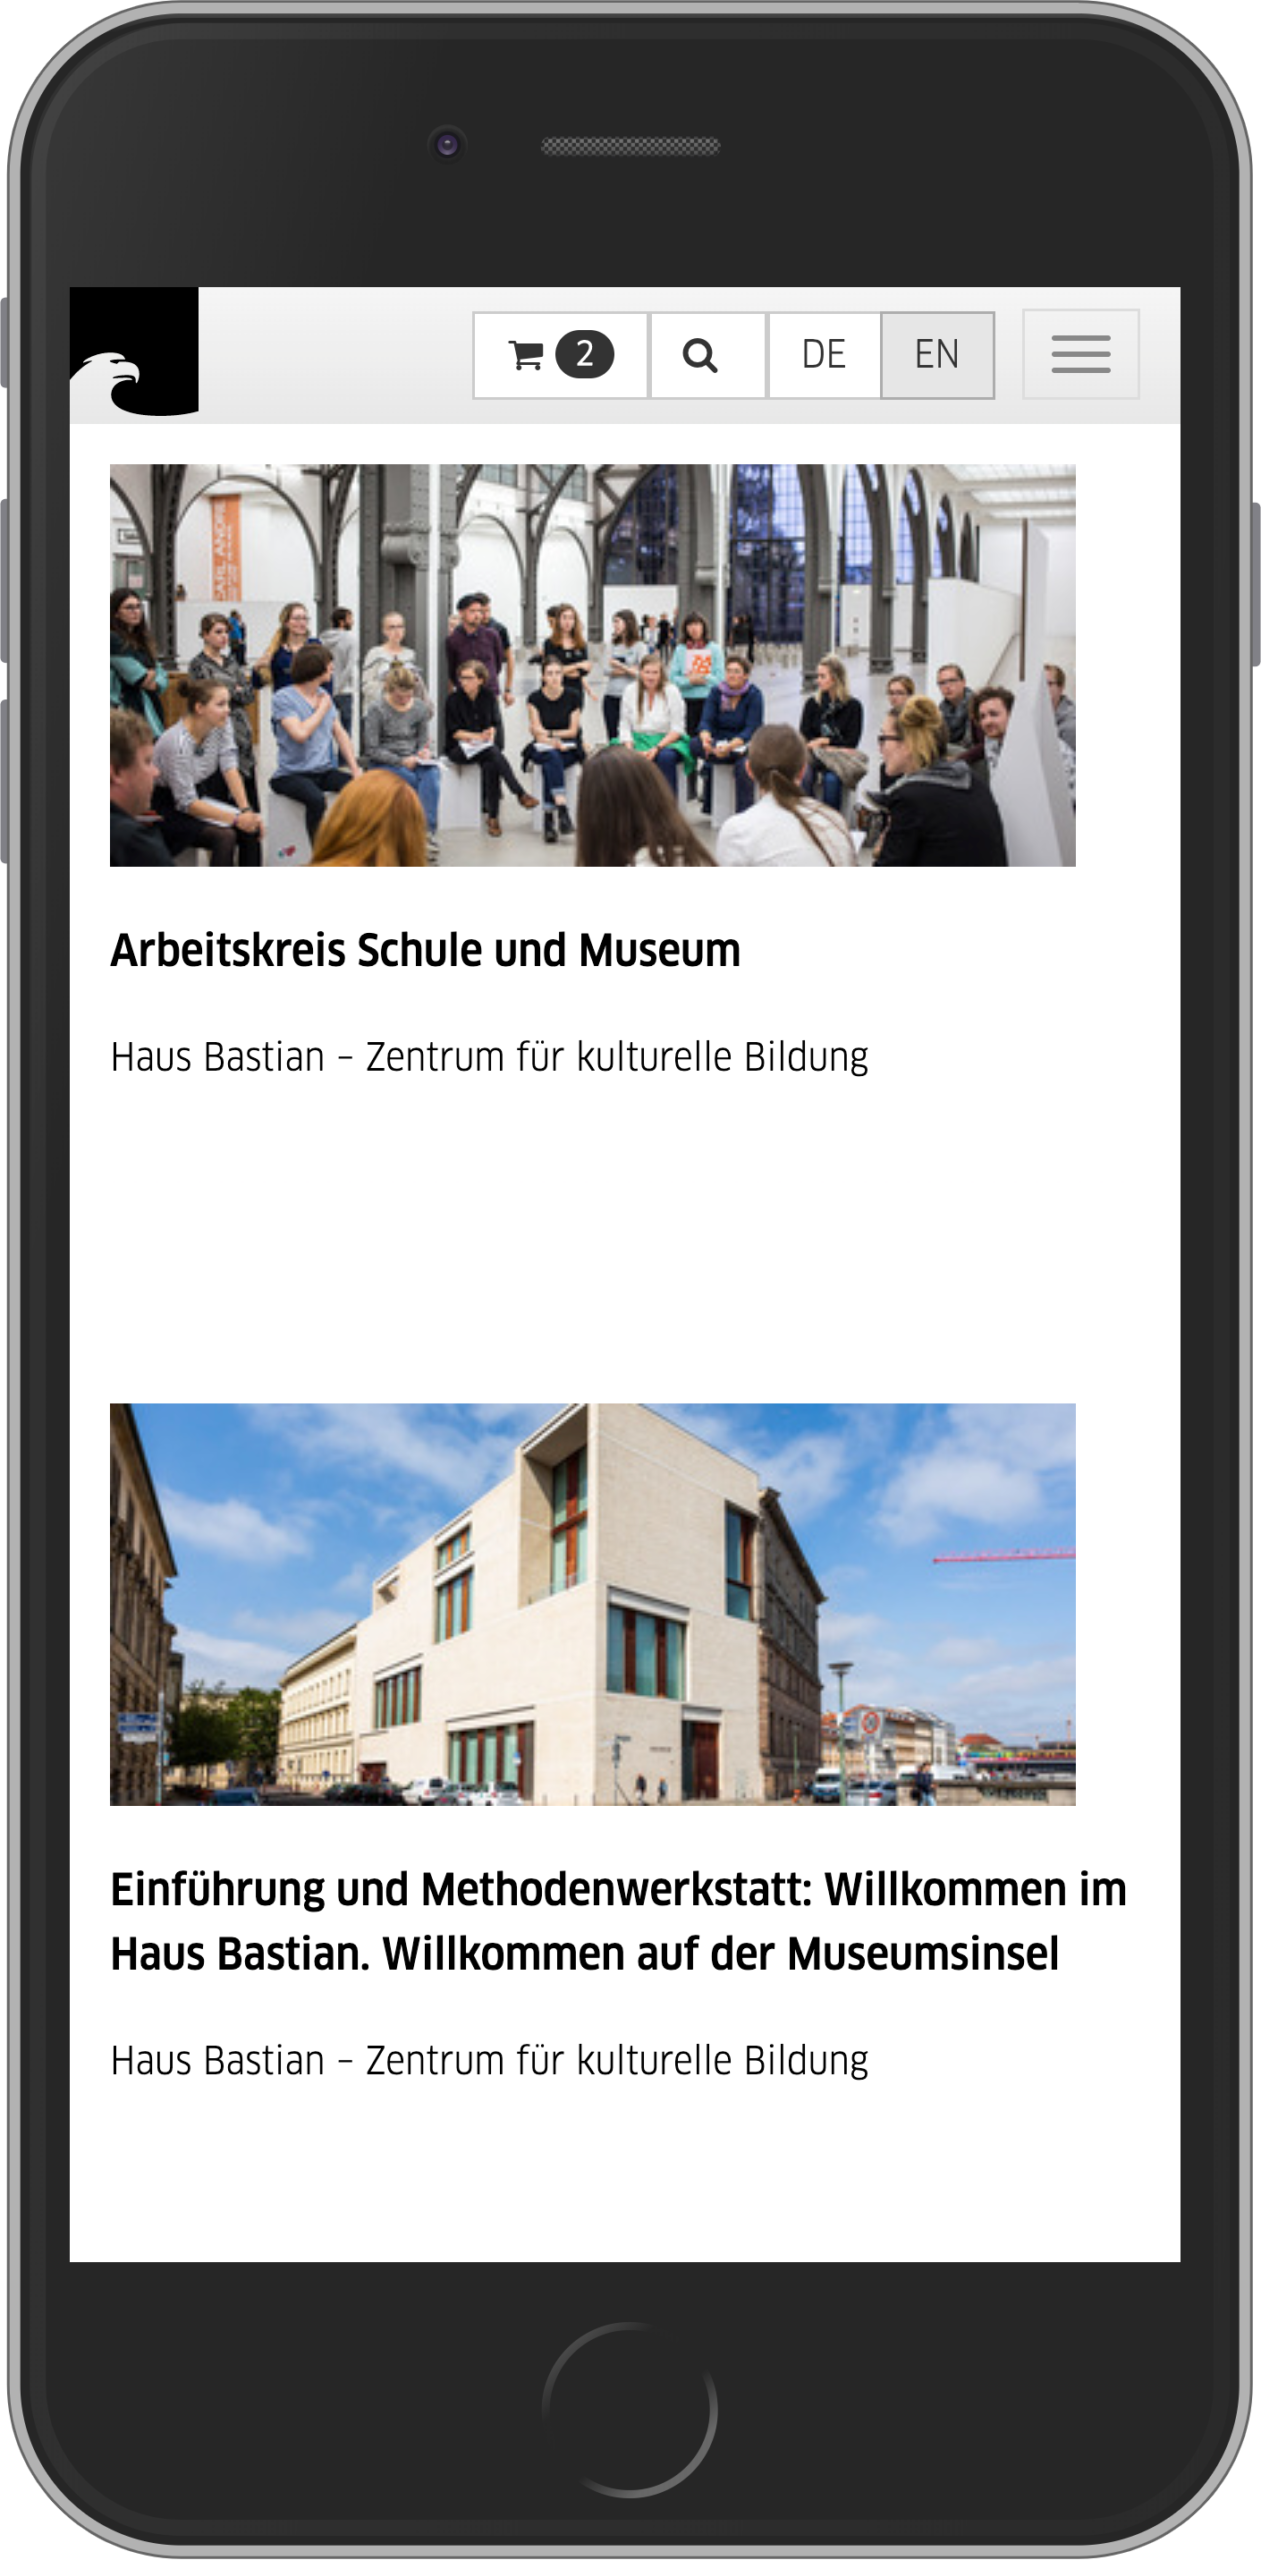 Mobile view of list of events in event booking process in online shop of Staatliche Museen zu Berlin (Berlin State Museums)